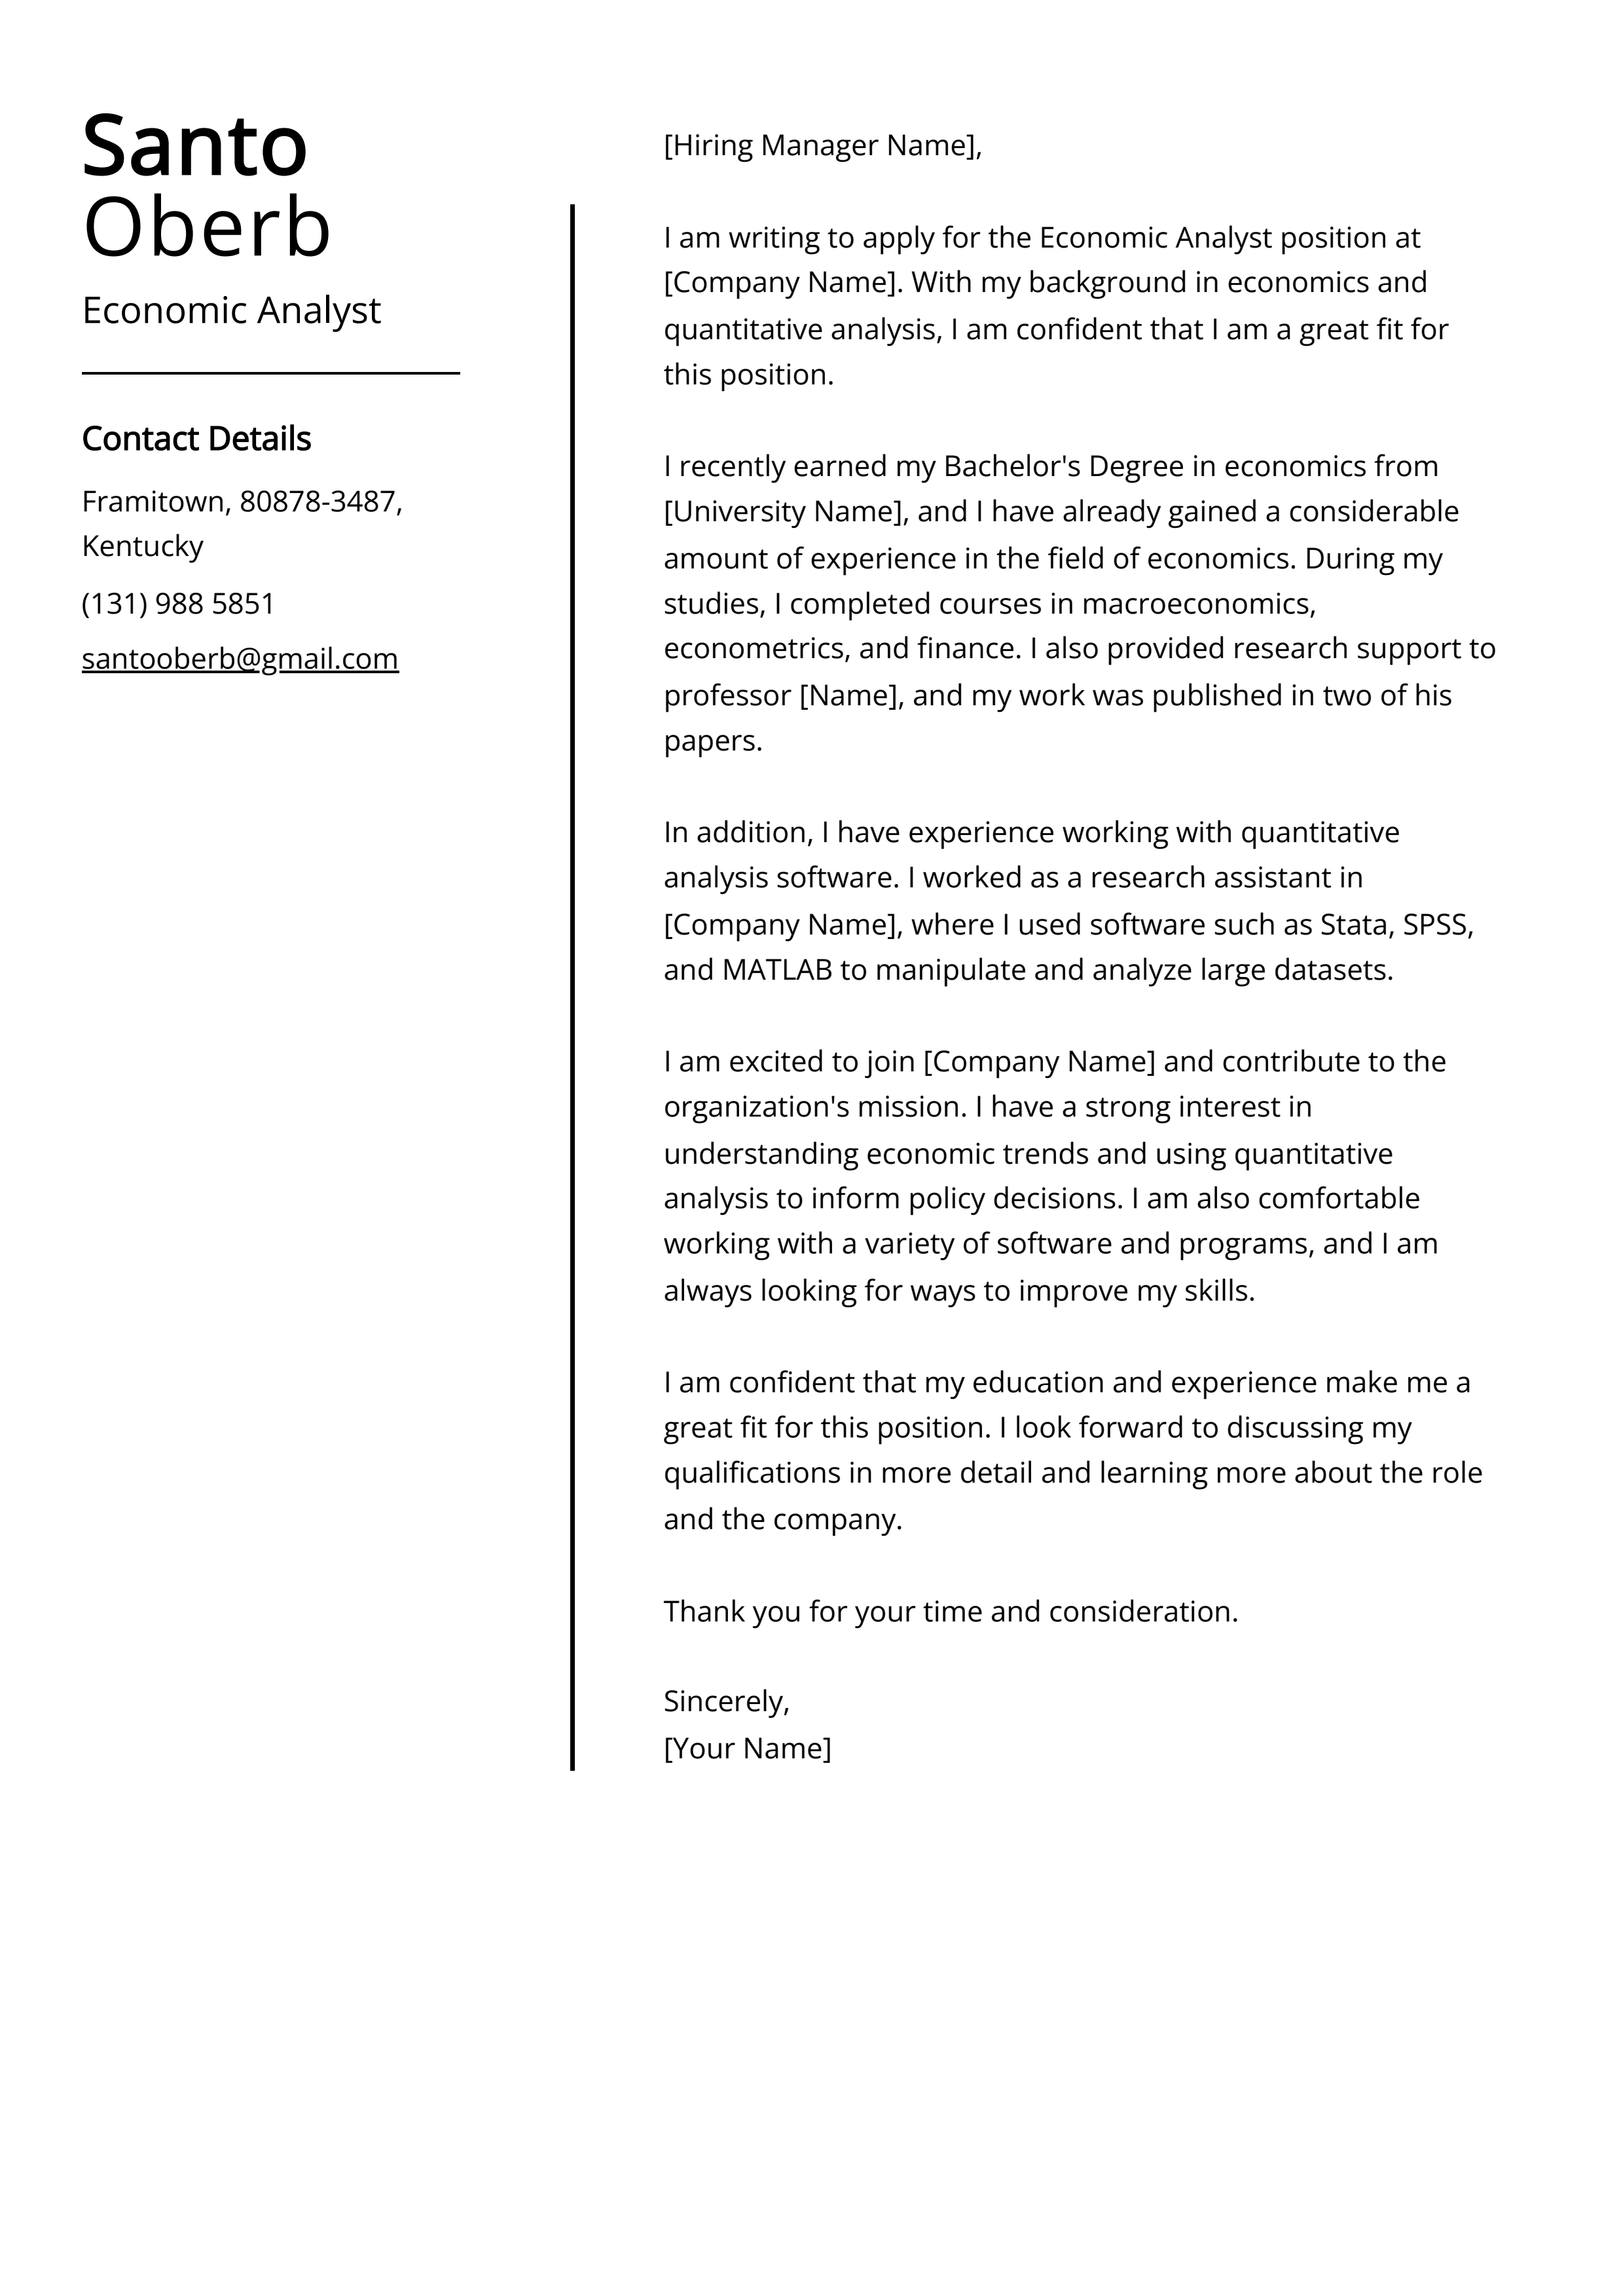 Economic Analyst Cover Letter Example